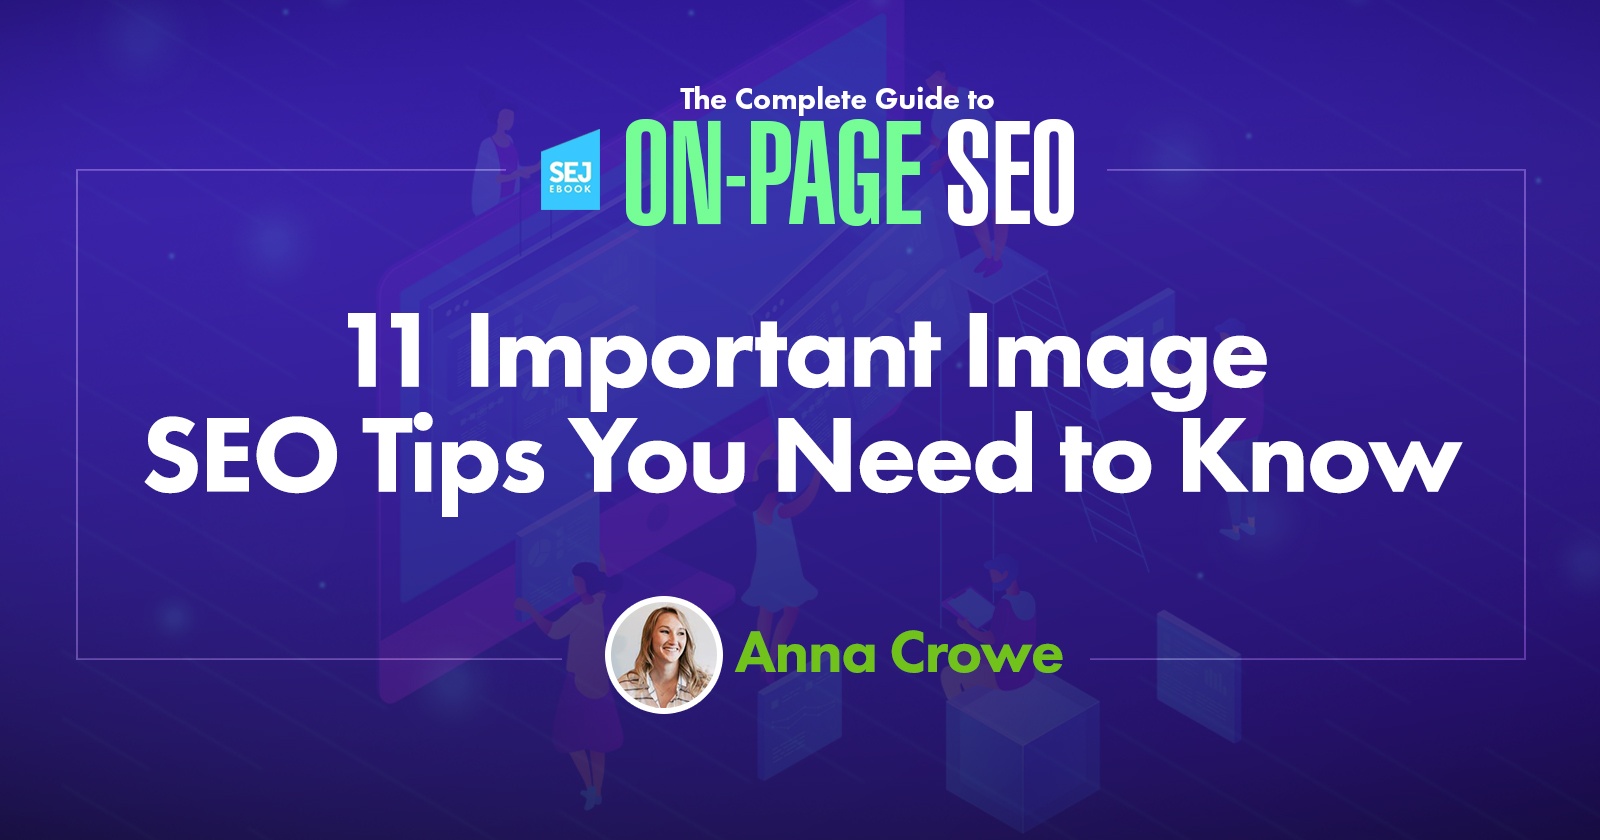 11 important image seo tips you need to know 5dbbbd56de55e